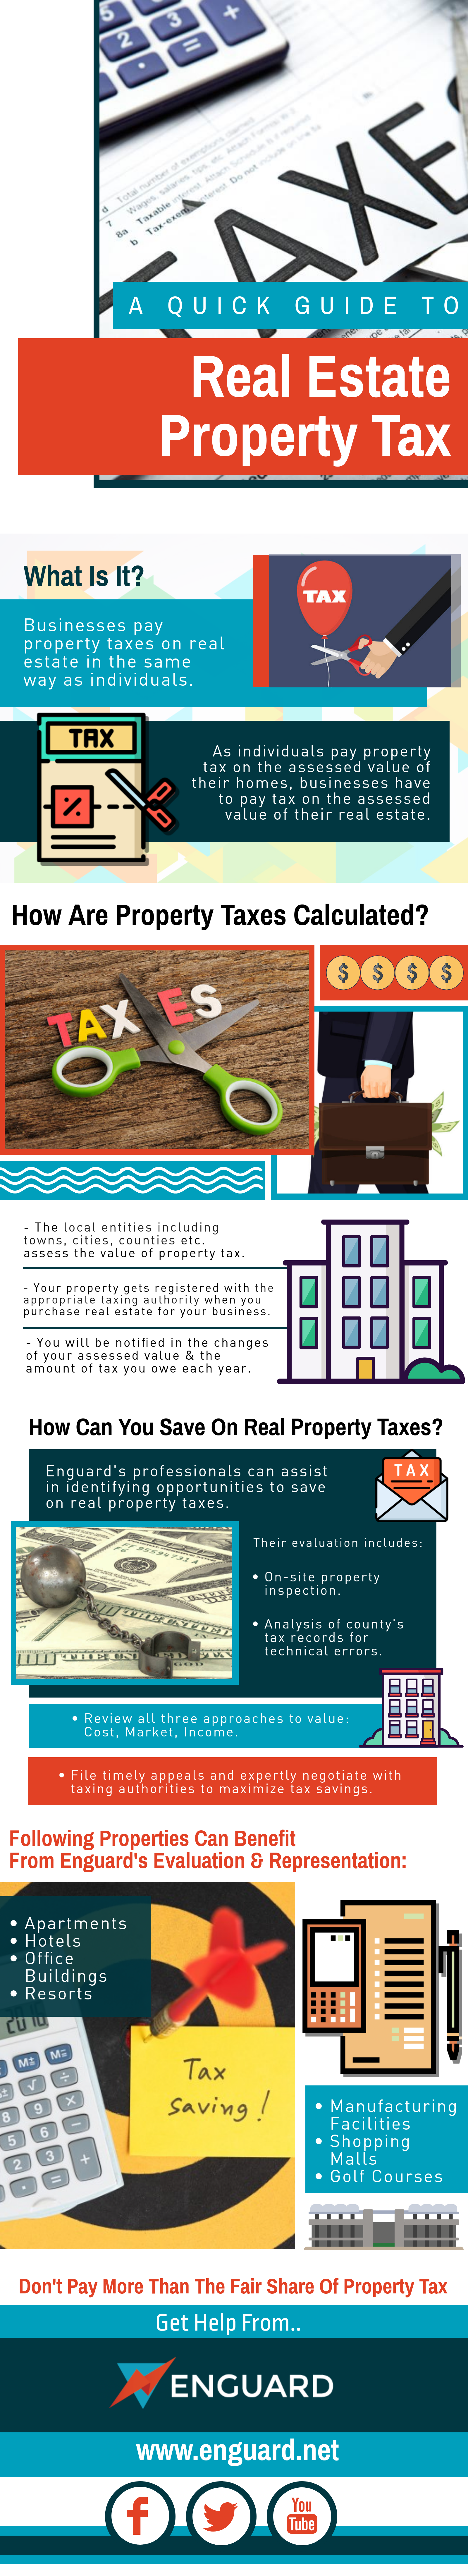 quick guide to property tax